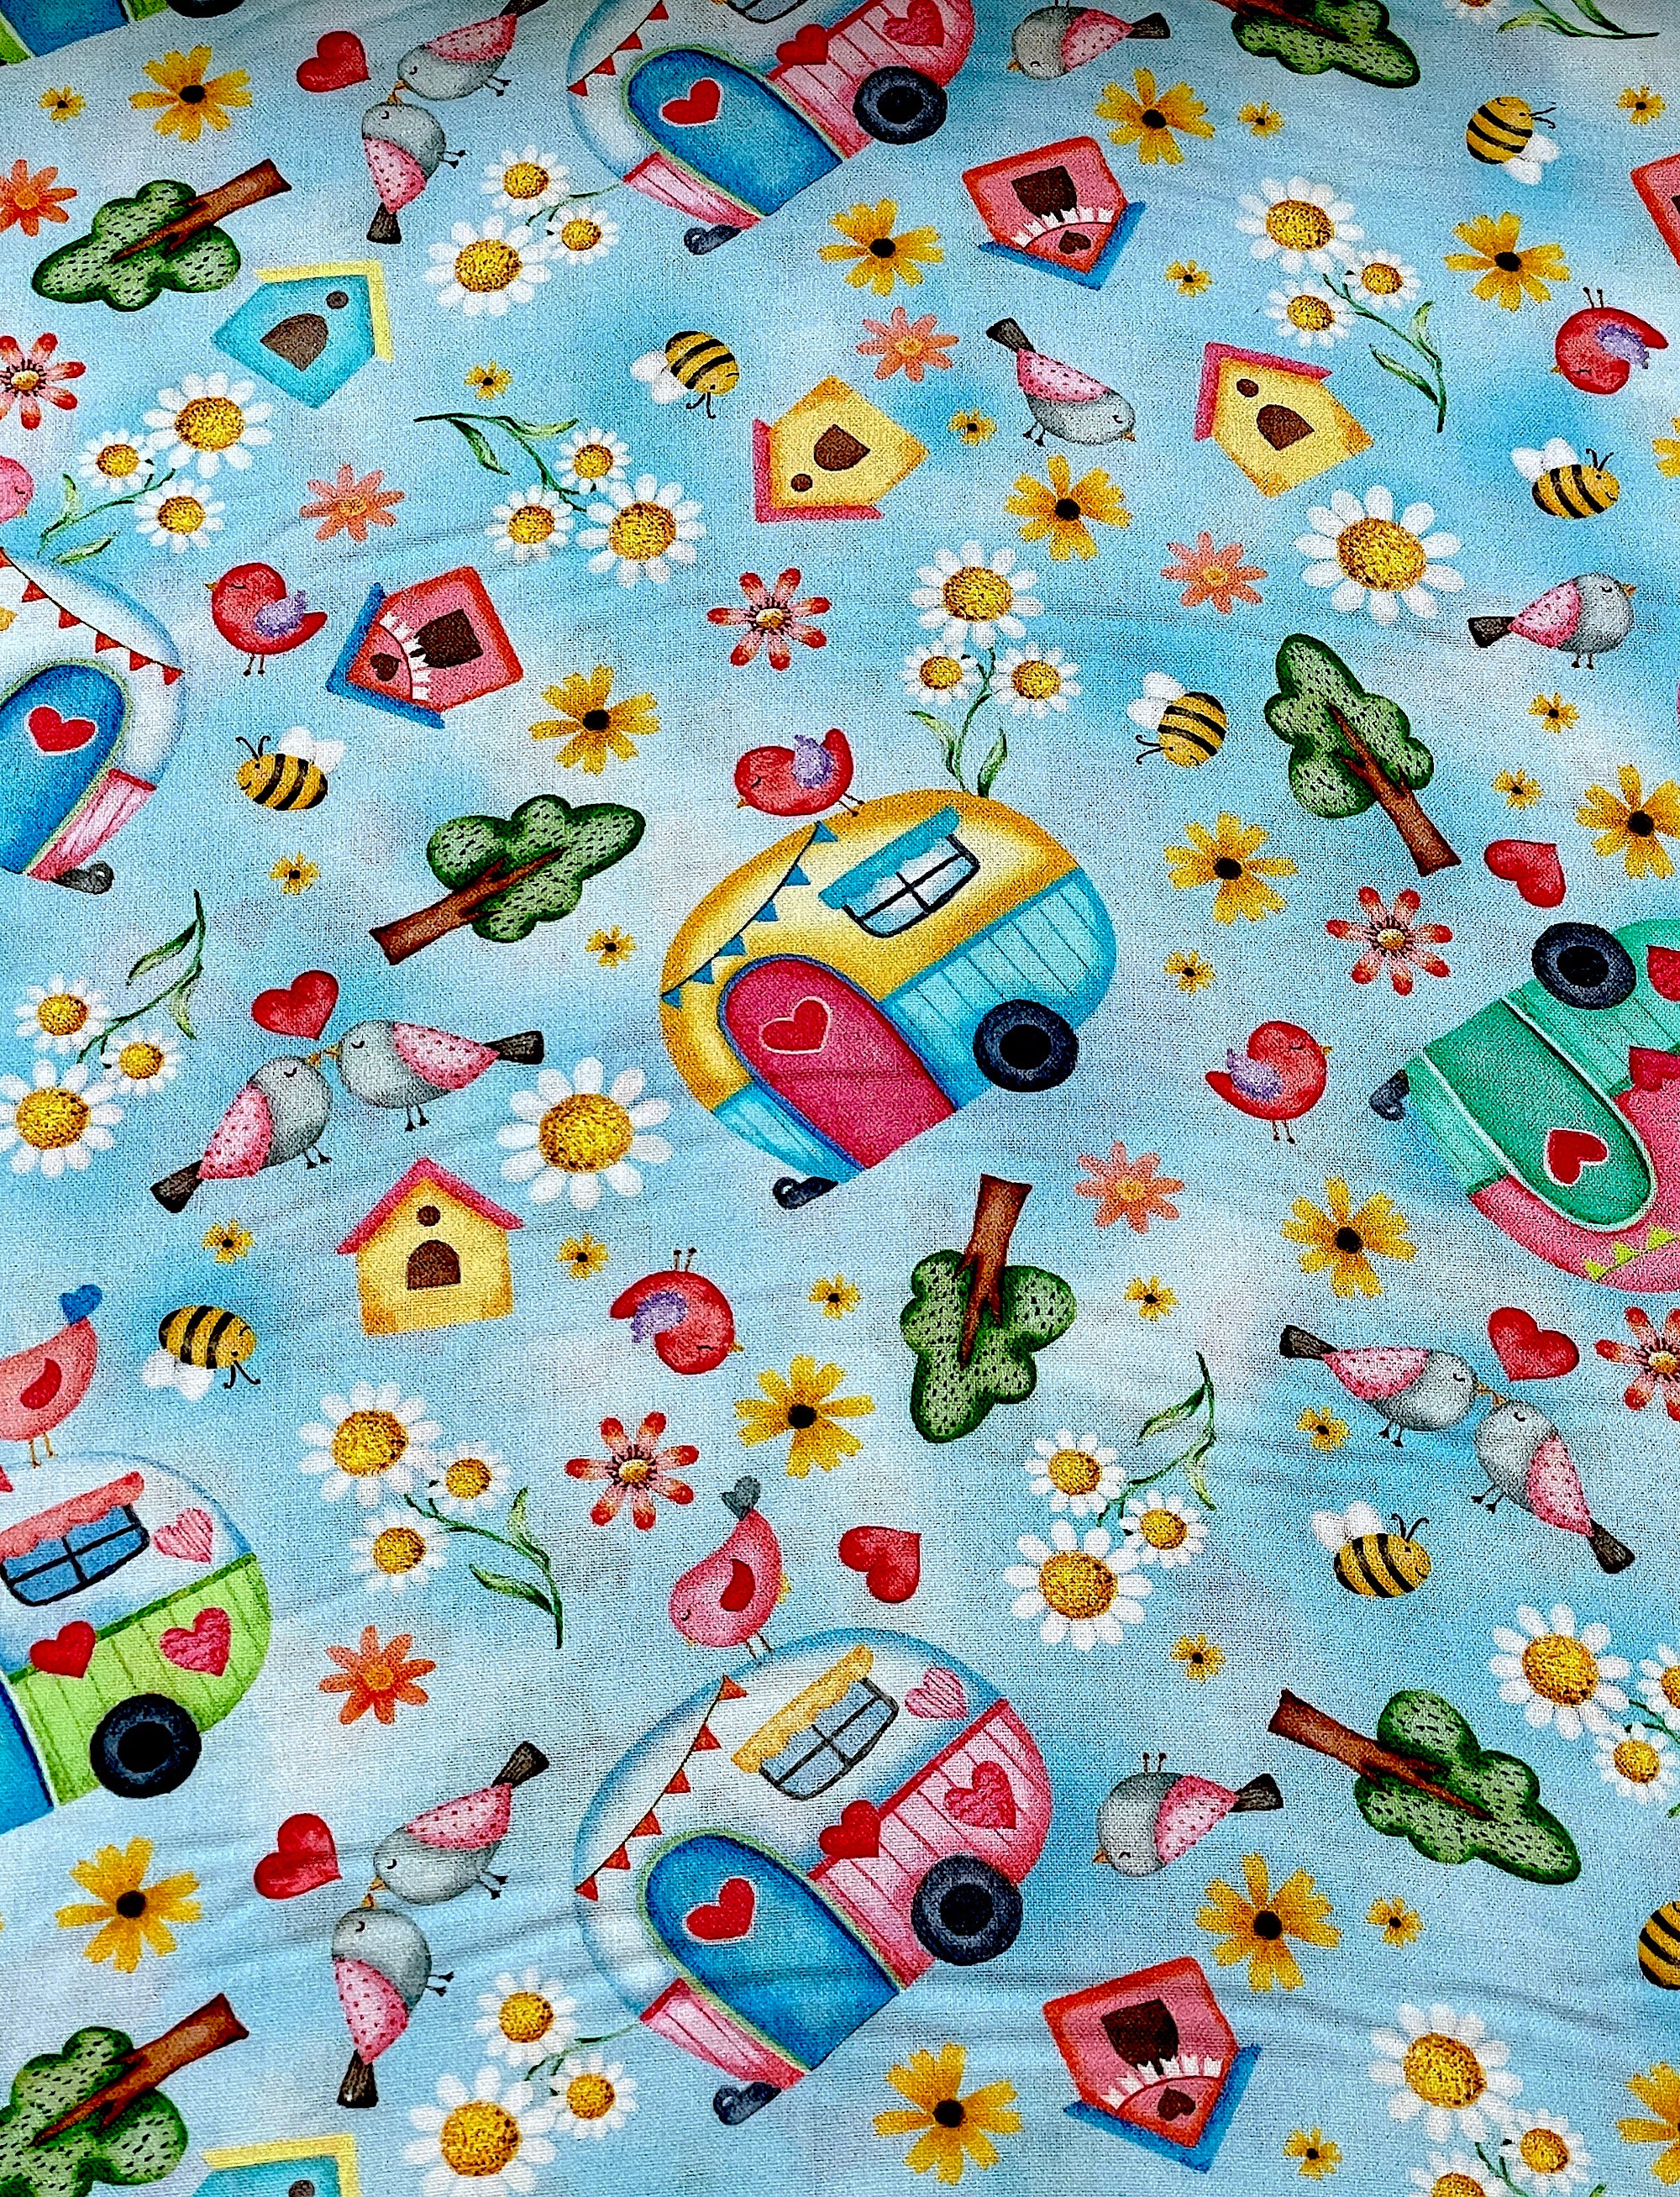 This fabric is part of the Sunshine Days collection by Nicole Decamp.&nbsp; This light blue fabric is covered with travel trailers, bird houses, trees, birds, trees and more.